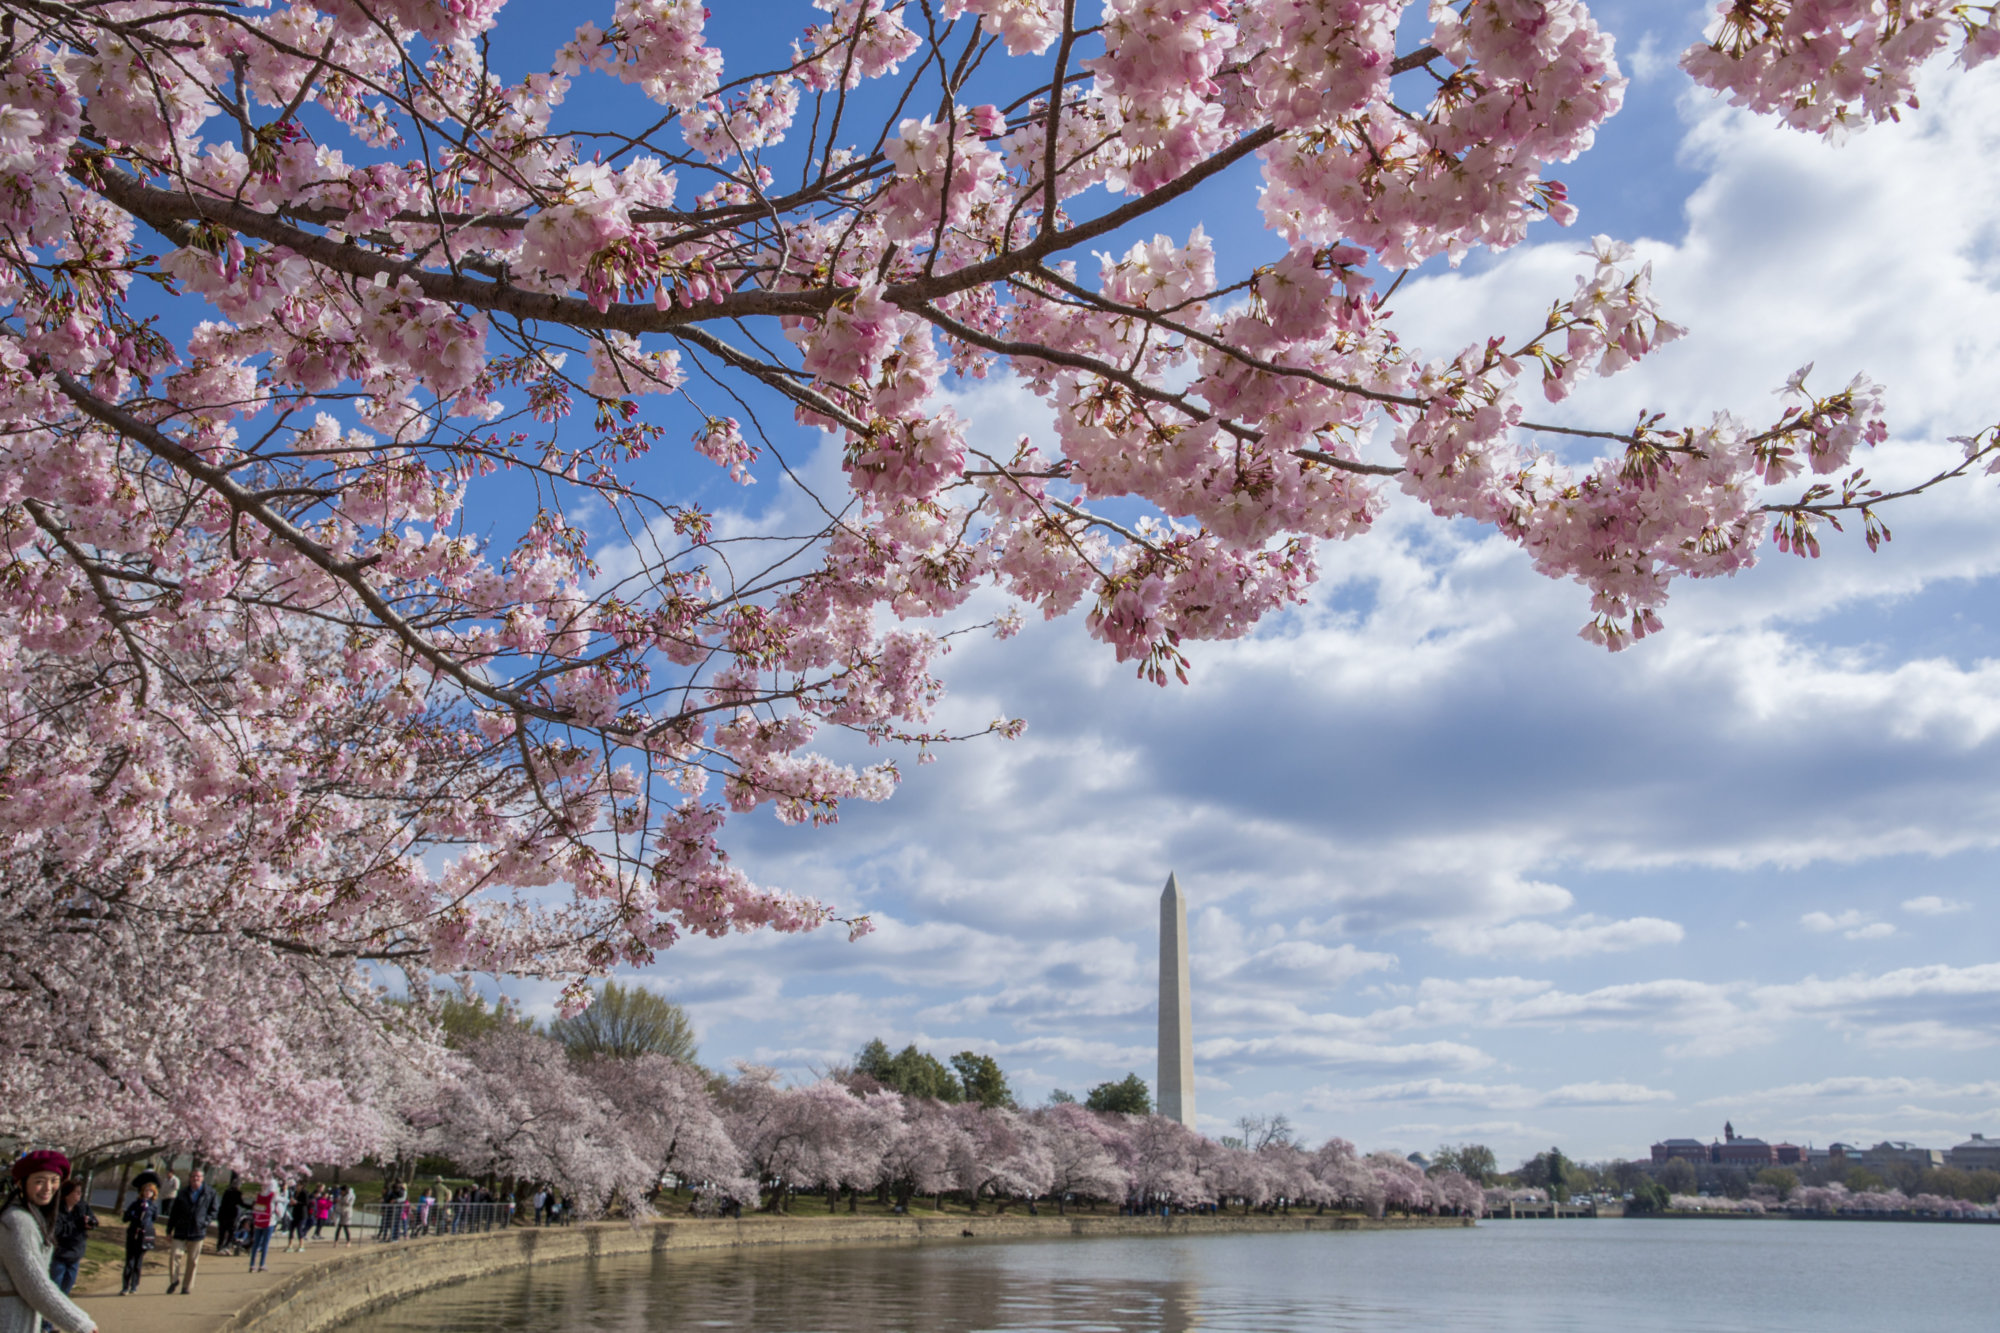 Washington becomes Bloom City with Wizards and Nationals blossom